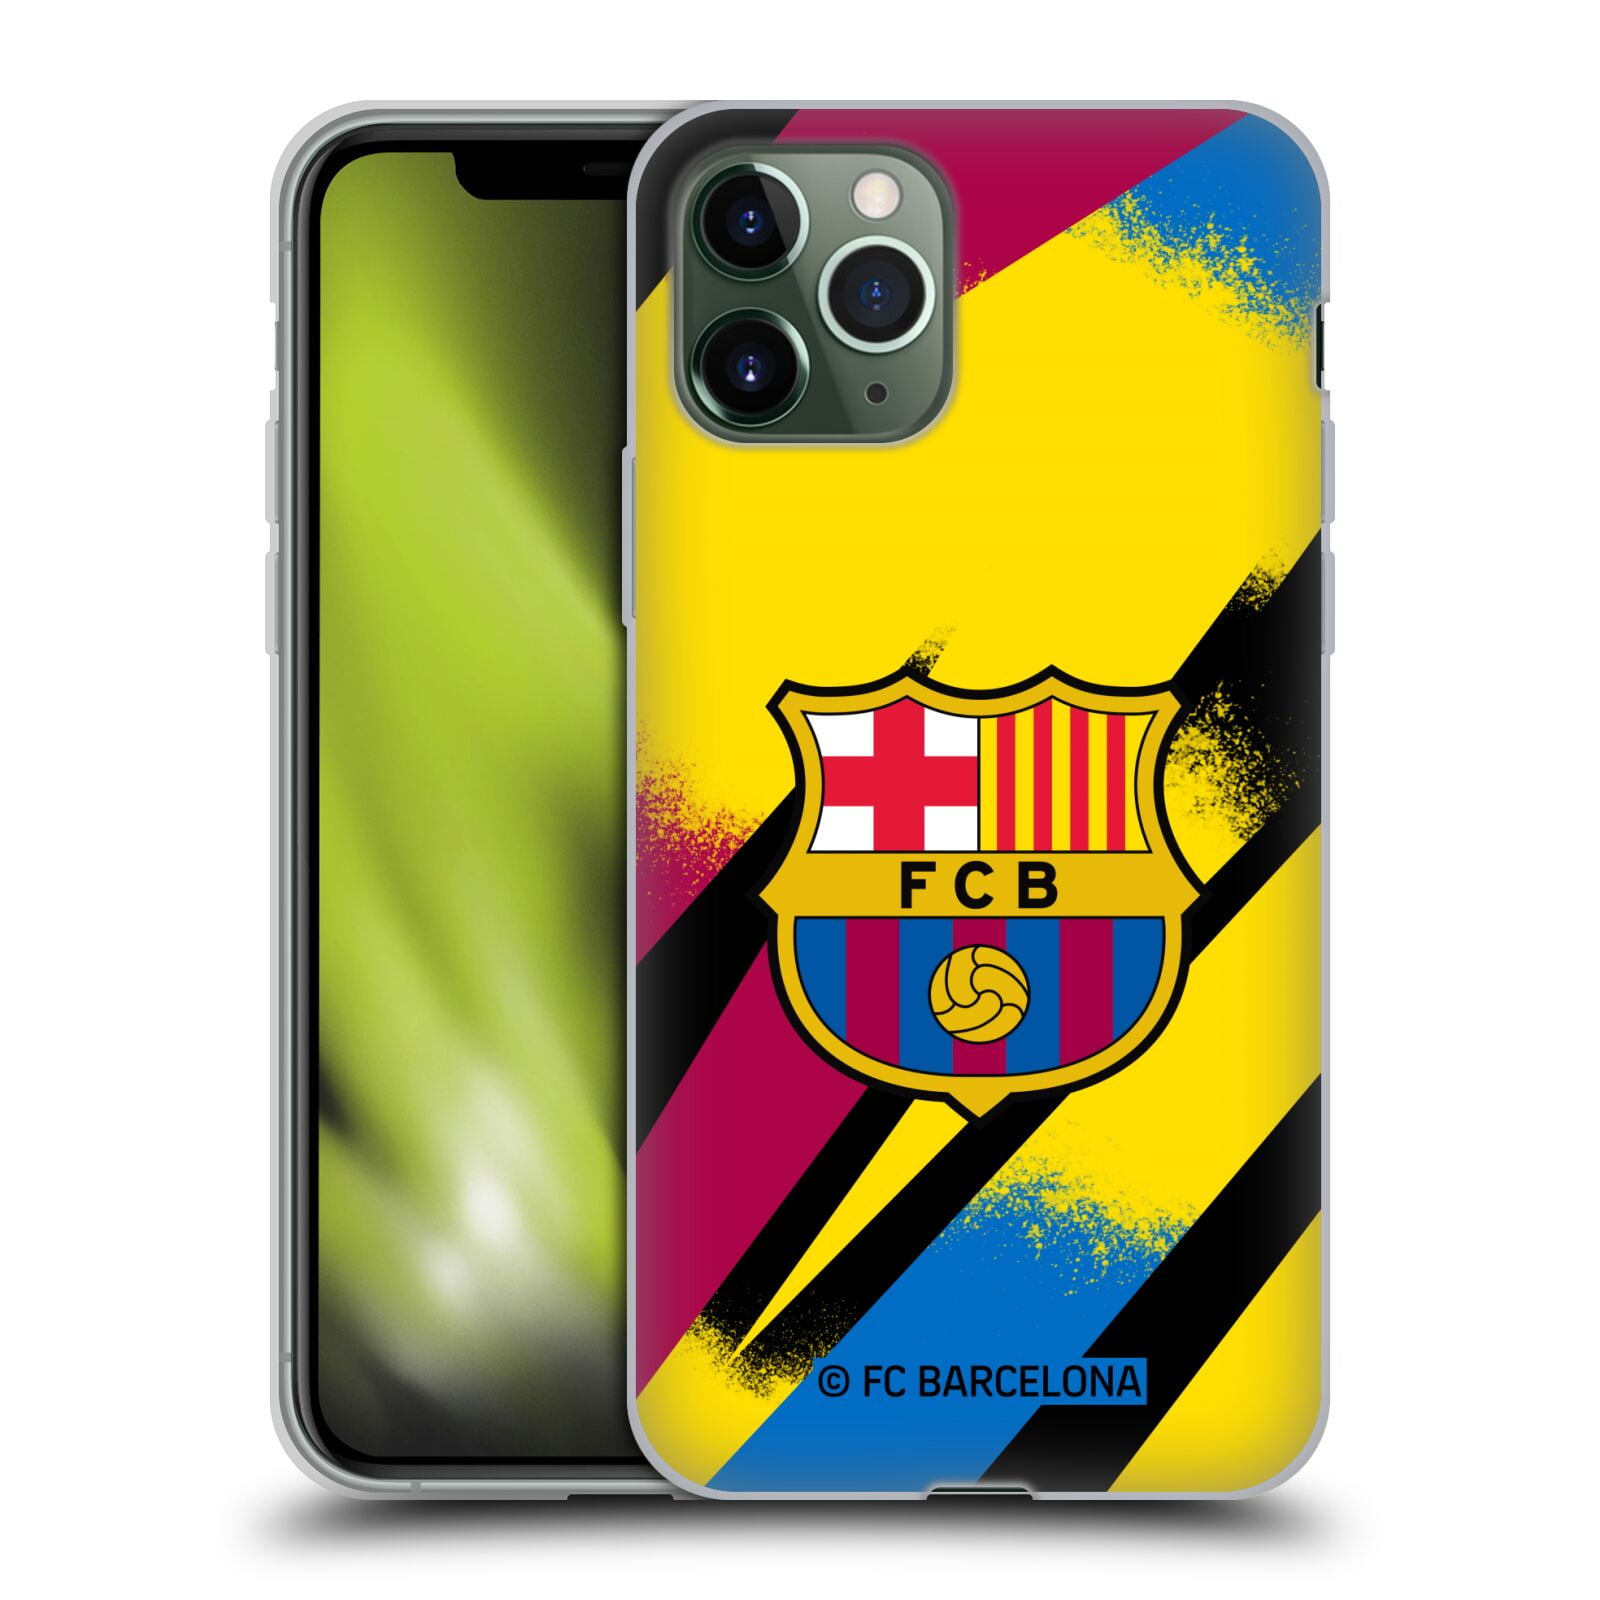 iPhone 8 Official Arsenal FC Away 2019/20 Crest Kit Hard Back Case Compatible for iPhone 7 